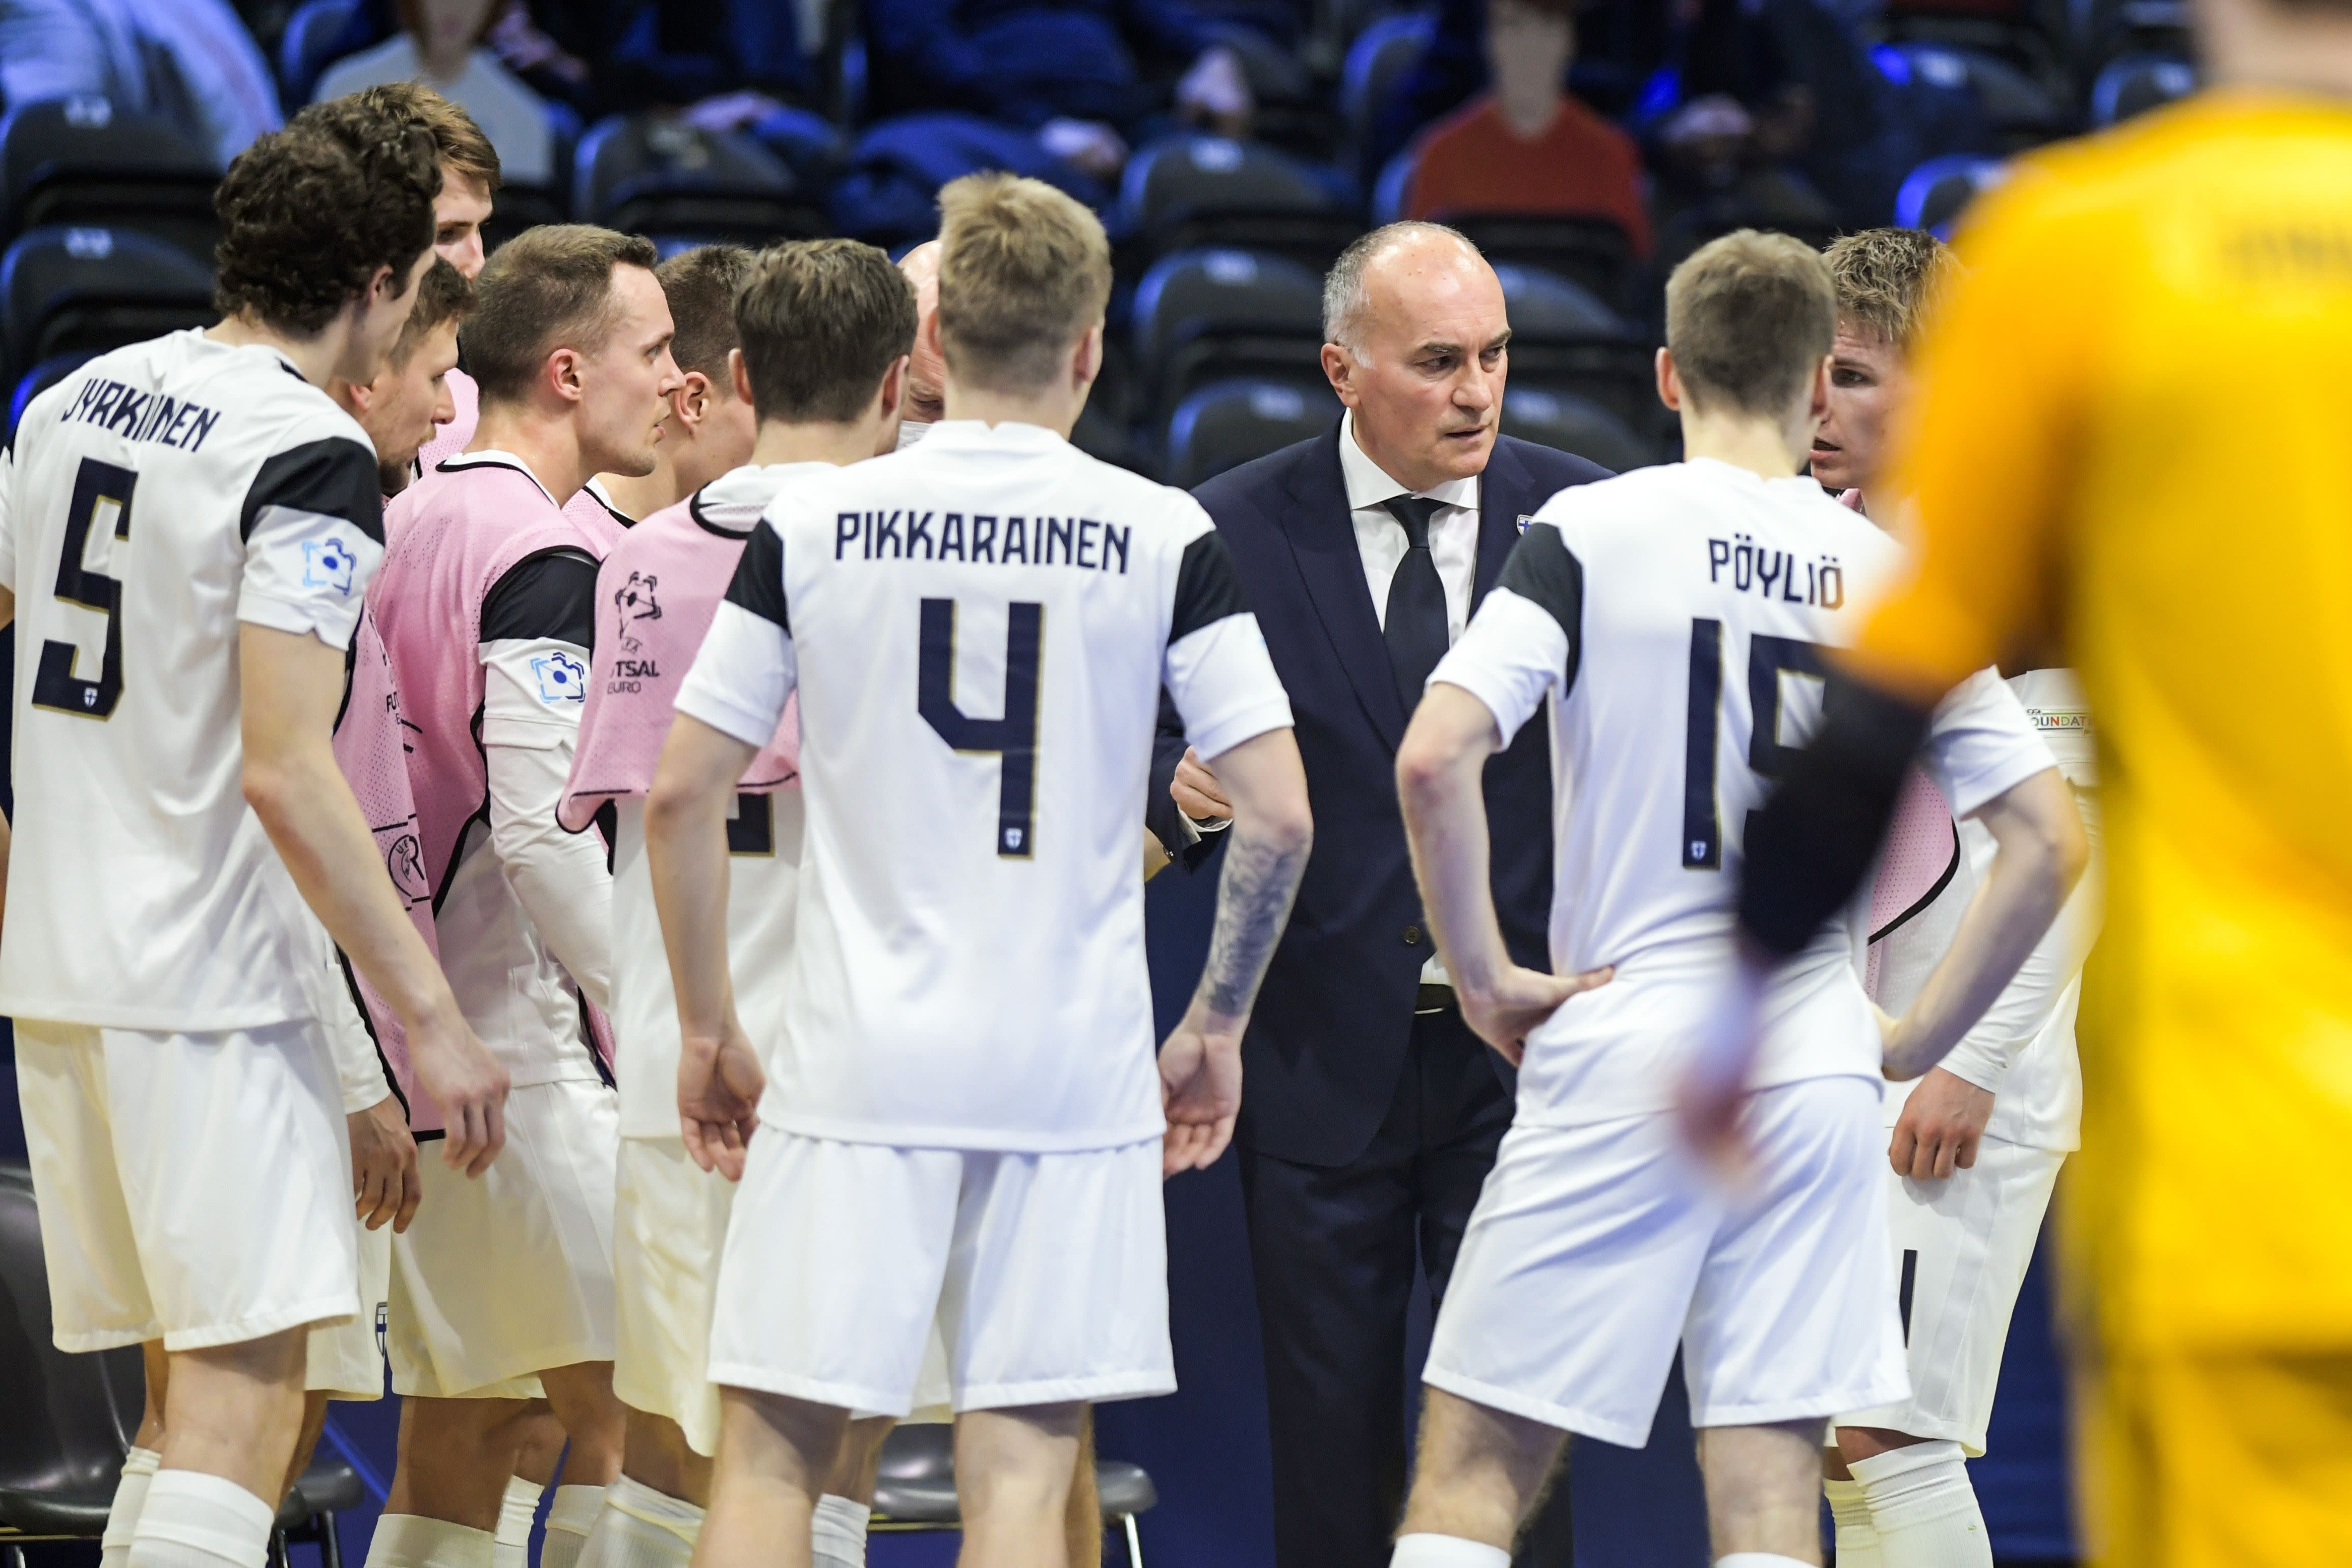 Finland will be relegated to the European Championship semi-finals